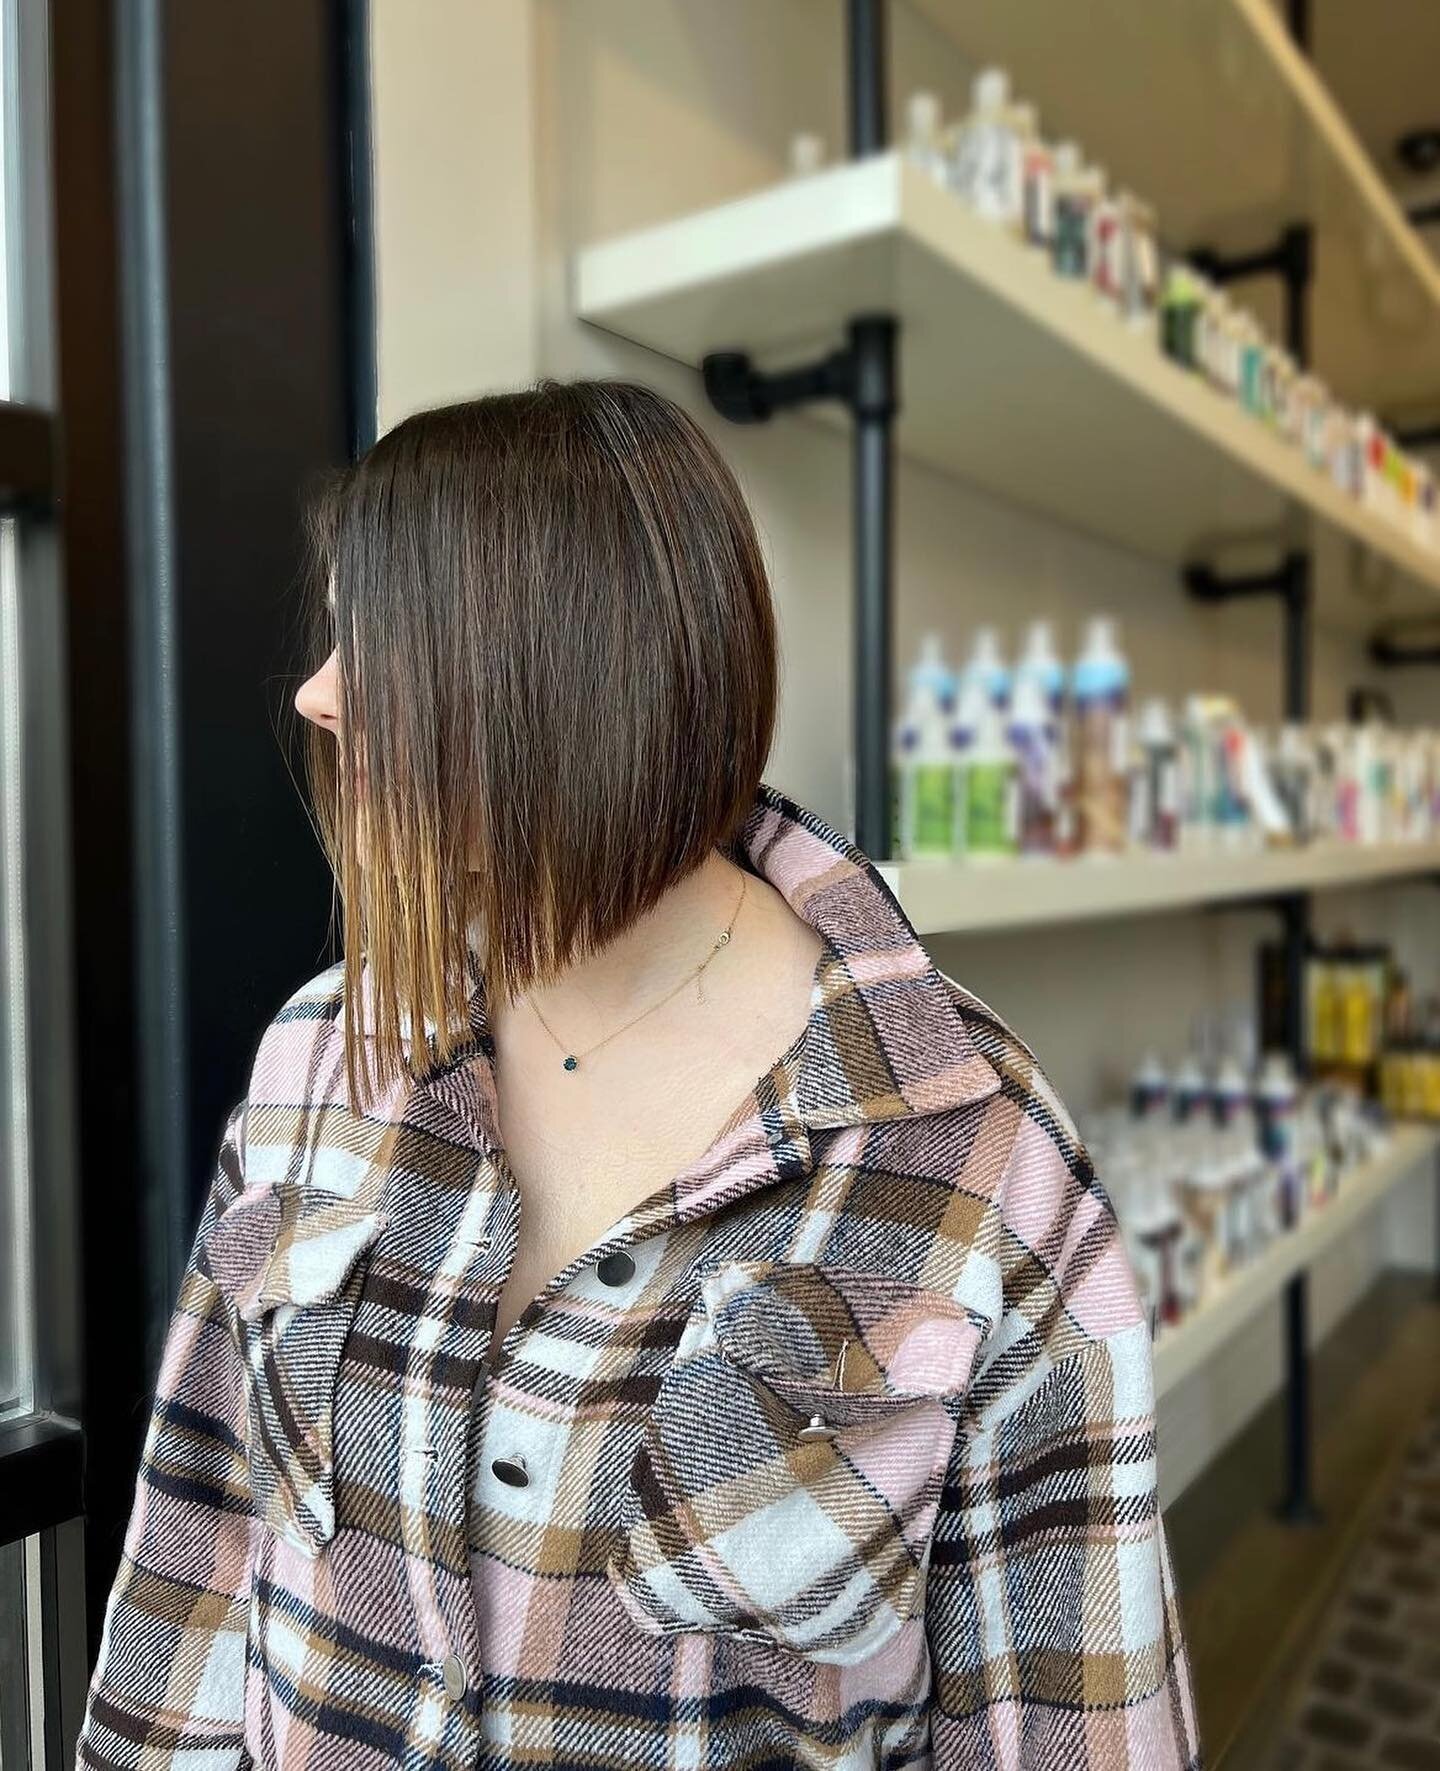 Cut to perfection 😍@katiesutt_⁠
⁠
⁠
Book your next appointment with Katie!⁠
📲 312-733-0123⁠
info@editsalons.com⁠
www.editsalons.com⁠
⁠
⁠
.⁠
#editsalon #chicagohairstylist #chicagohairstylists #chicagohairsalon #chicagosalon #chicagosalons #chicagoc